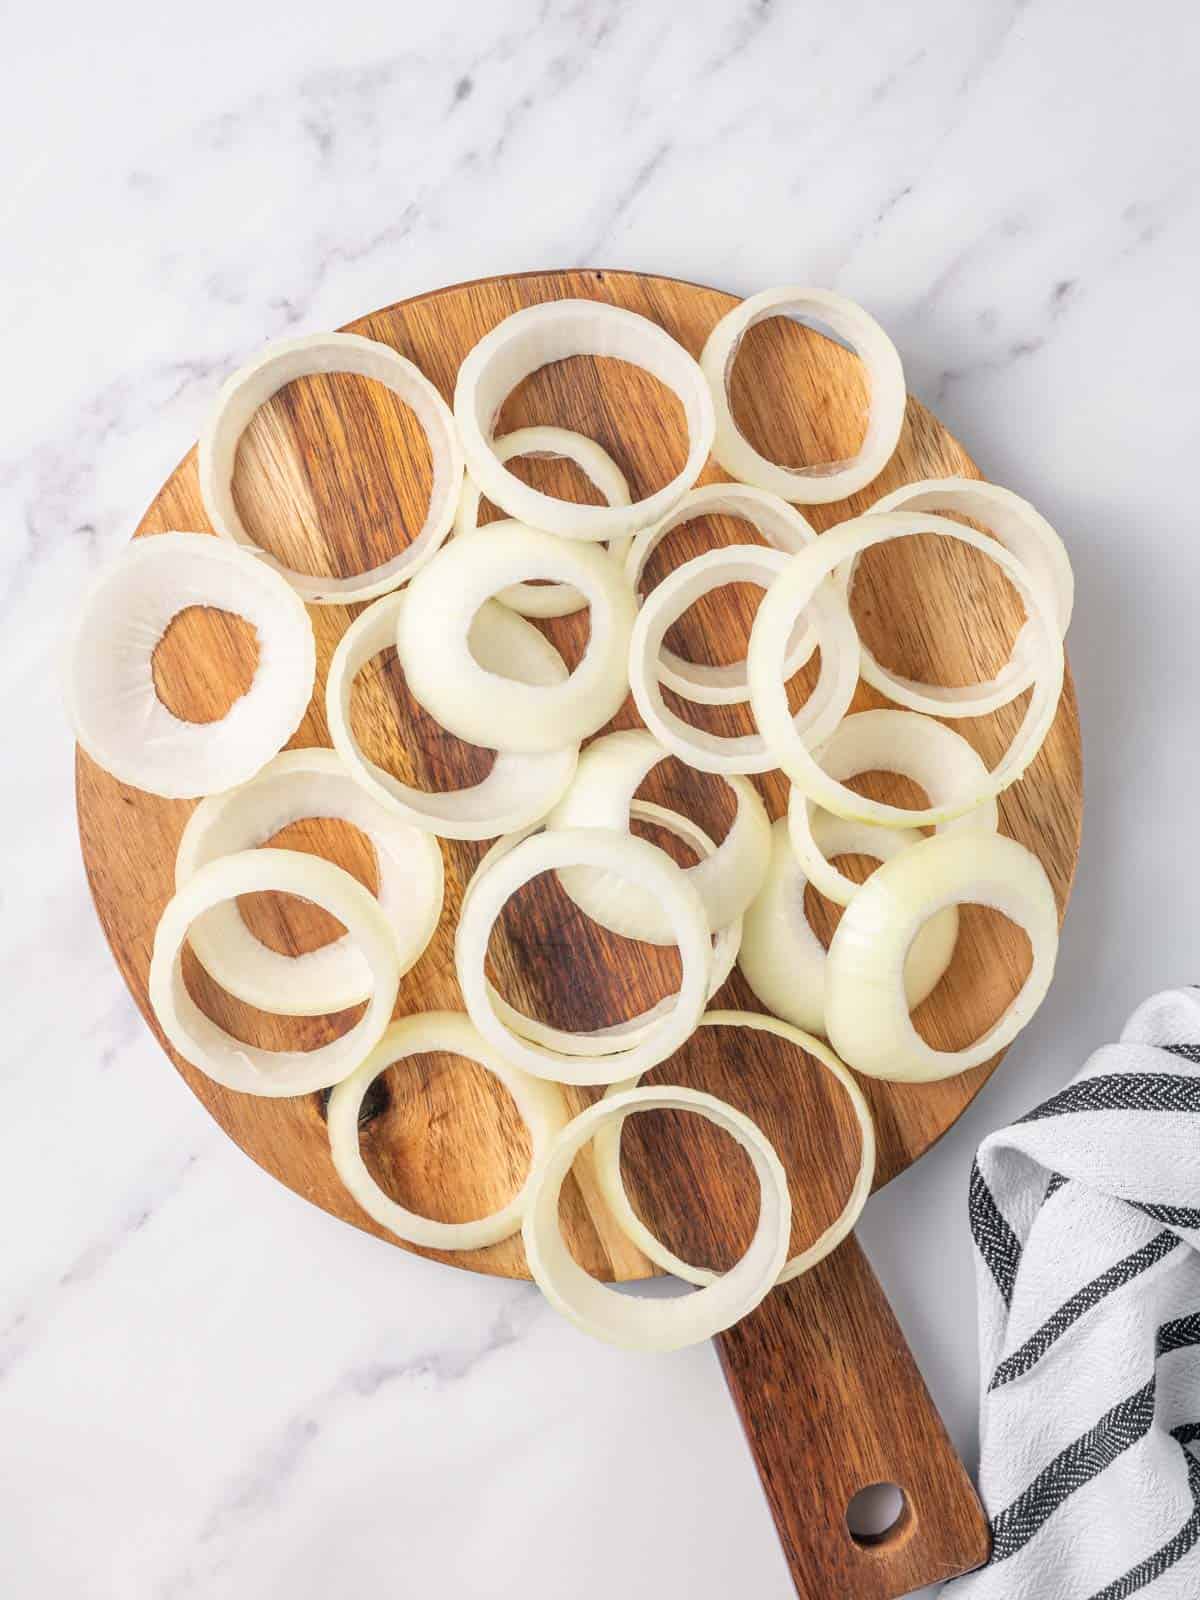 Even slices of onions for making onion rings.